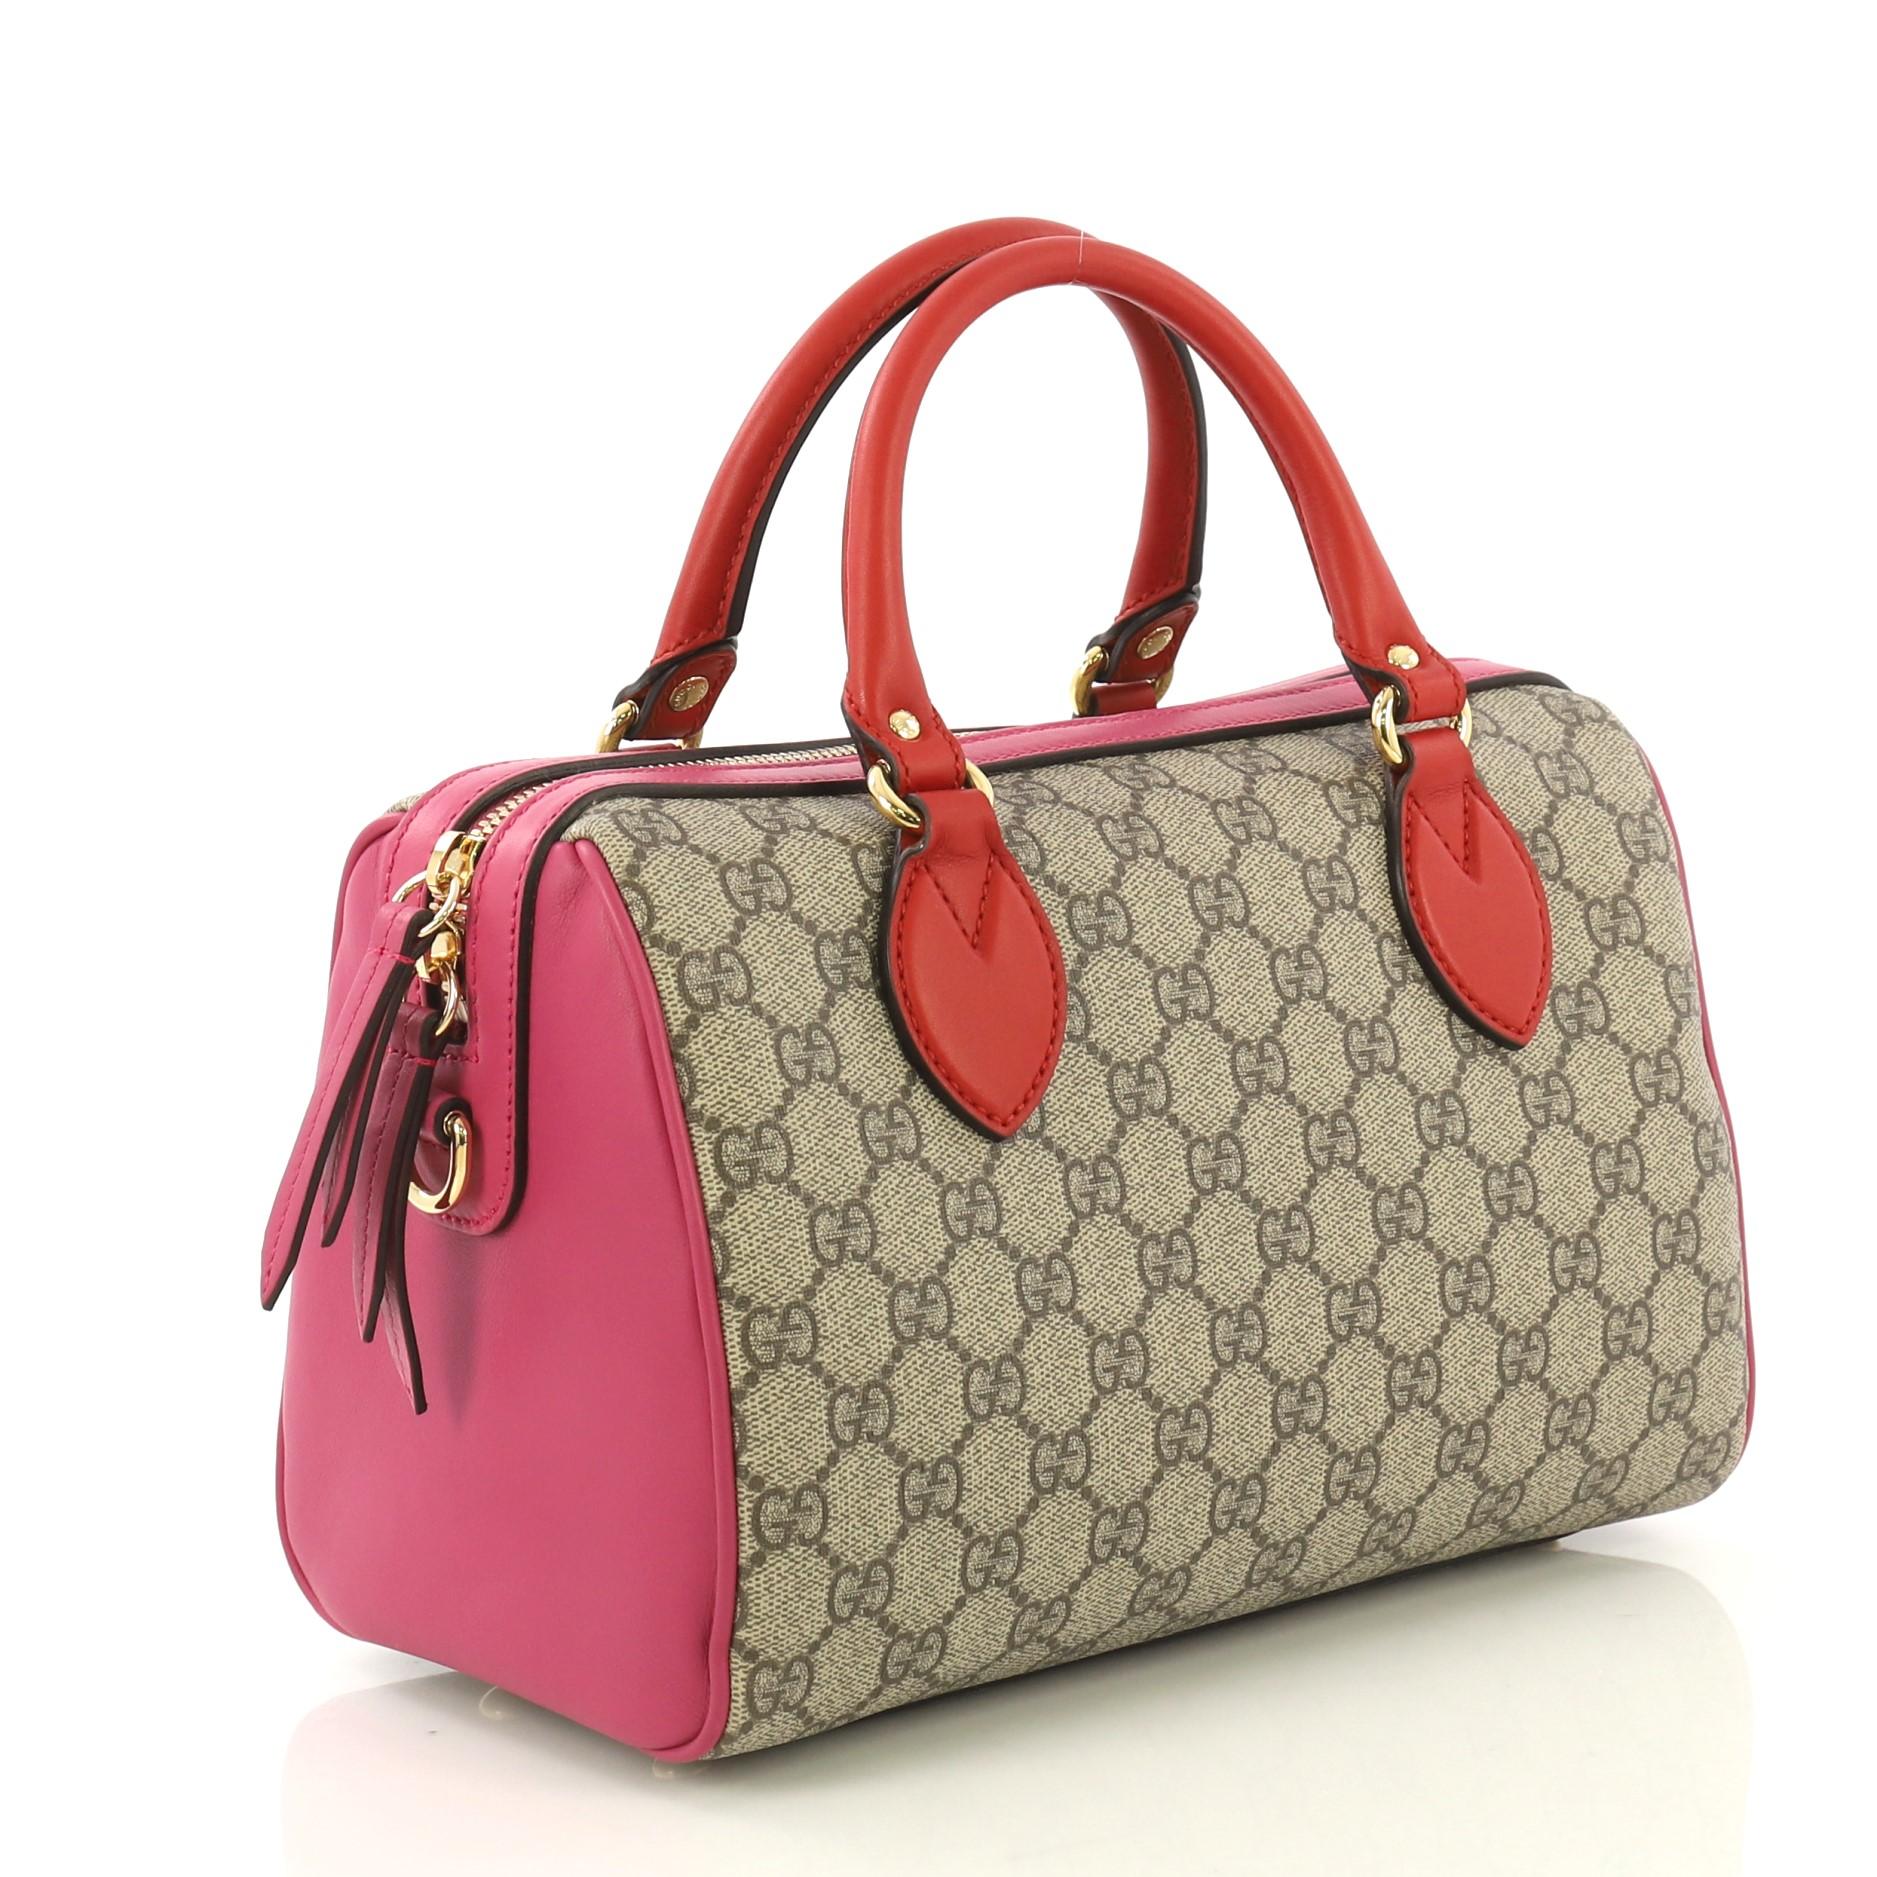 This Gucci Convertible Boston Bag GG Coated Canvas and Leather Small, crafted in brown GG coated canvas and pink leather, features dual rolled leather handles, protective base studs and gold-tone hardware. Its zip closure opens to a brown microfiber